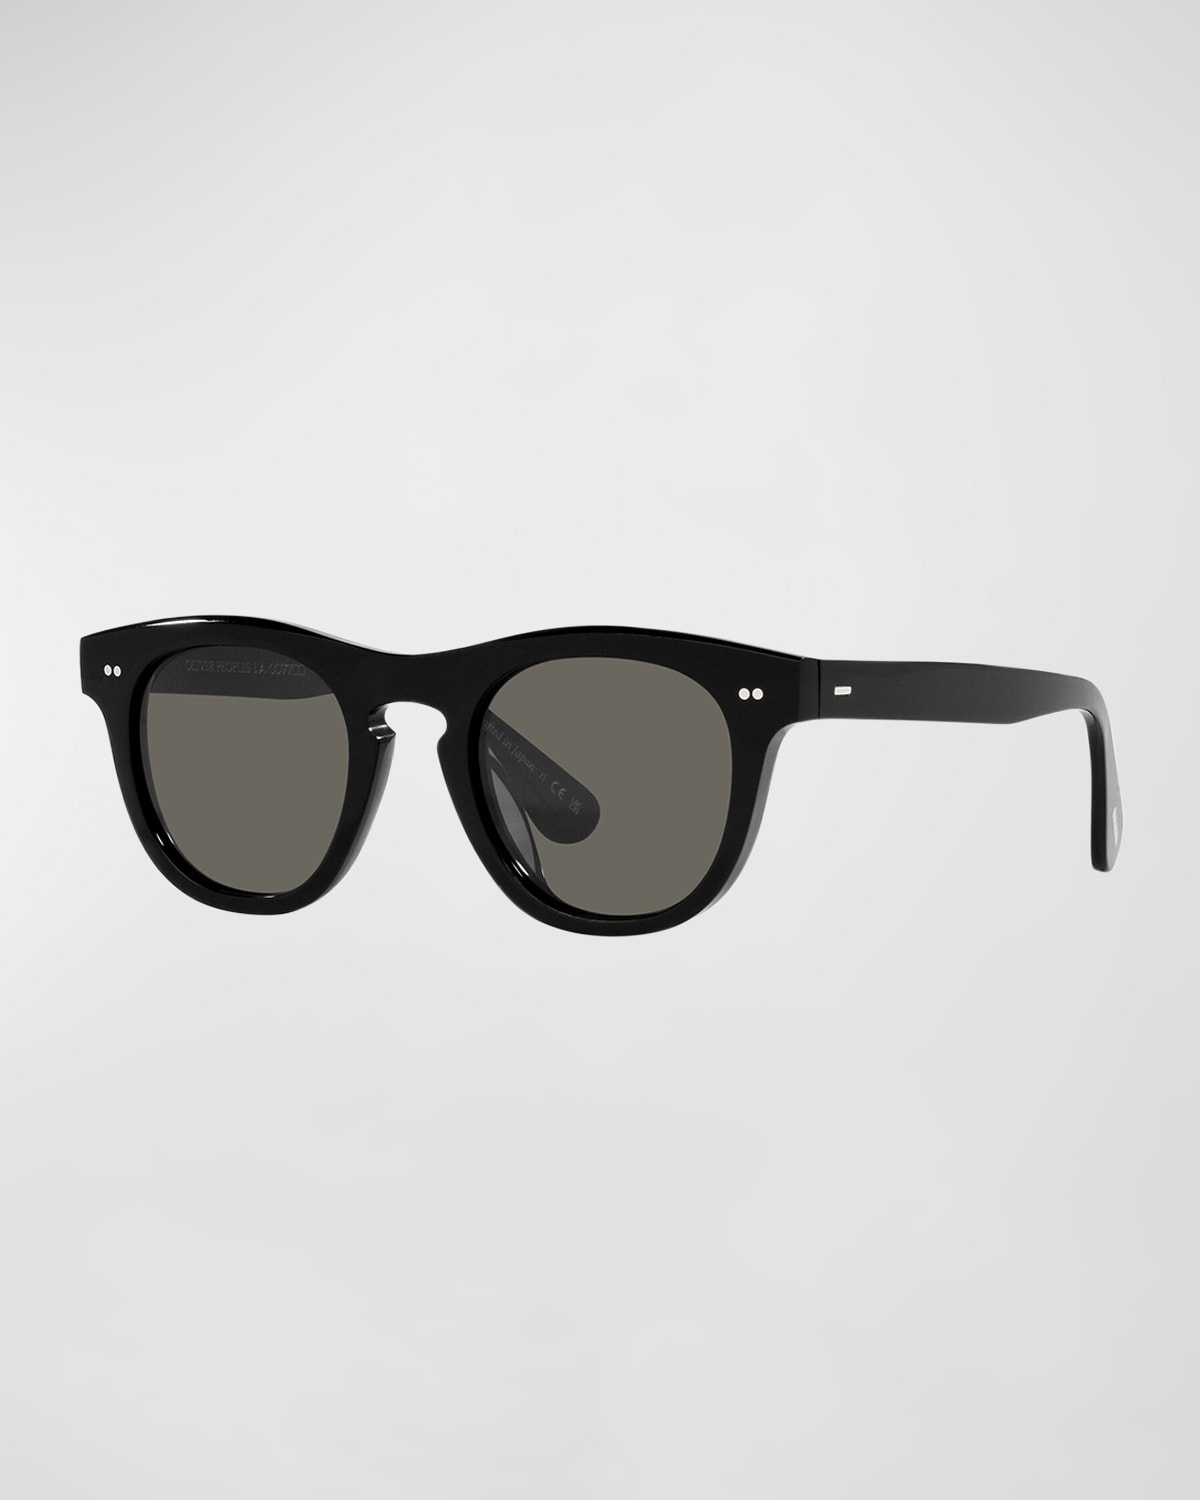 OLIVER PEOPLES MEN'S RORKE ROUND ACETATE & CRYSTAL SUNGLASSES